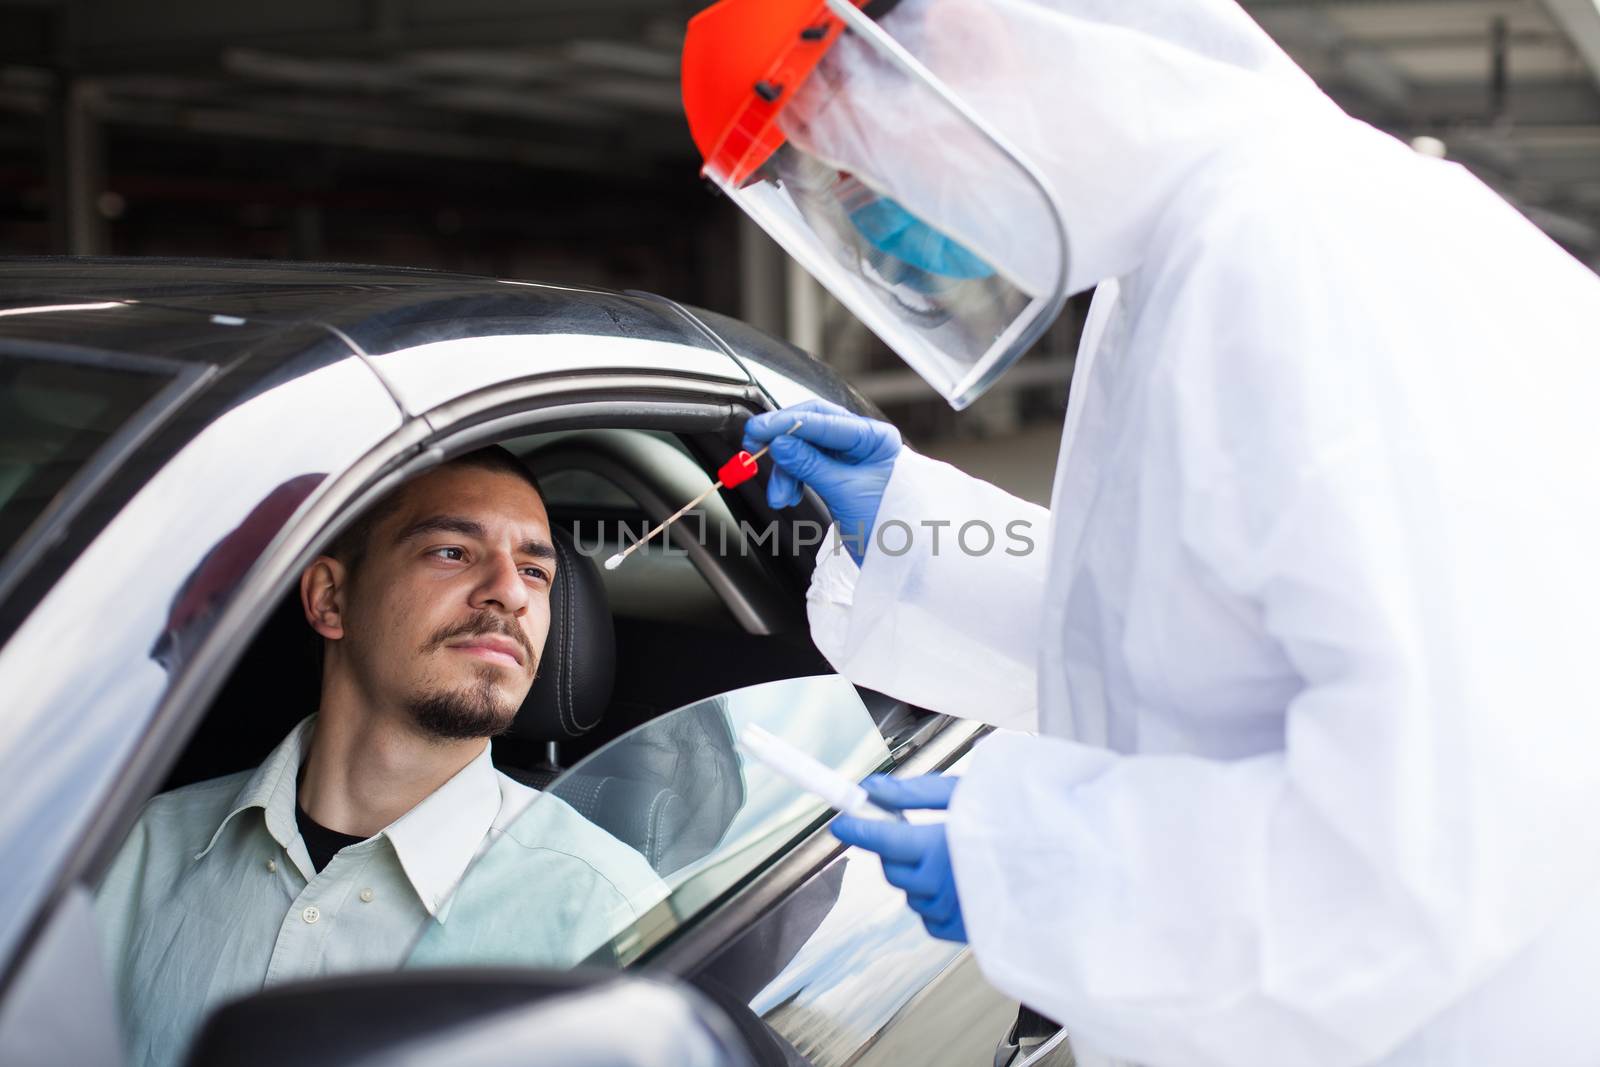 COVID-19 drive-thru rt-PCR detection,car checkpoint diagnostic,medical worker performing nasal swab specimen collection on young male driver through vehicle window,epidemiologist in PPE swabbing a guy